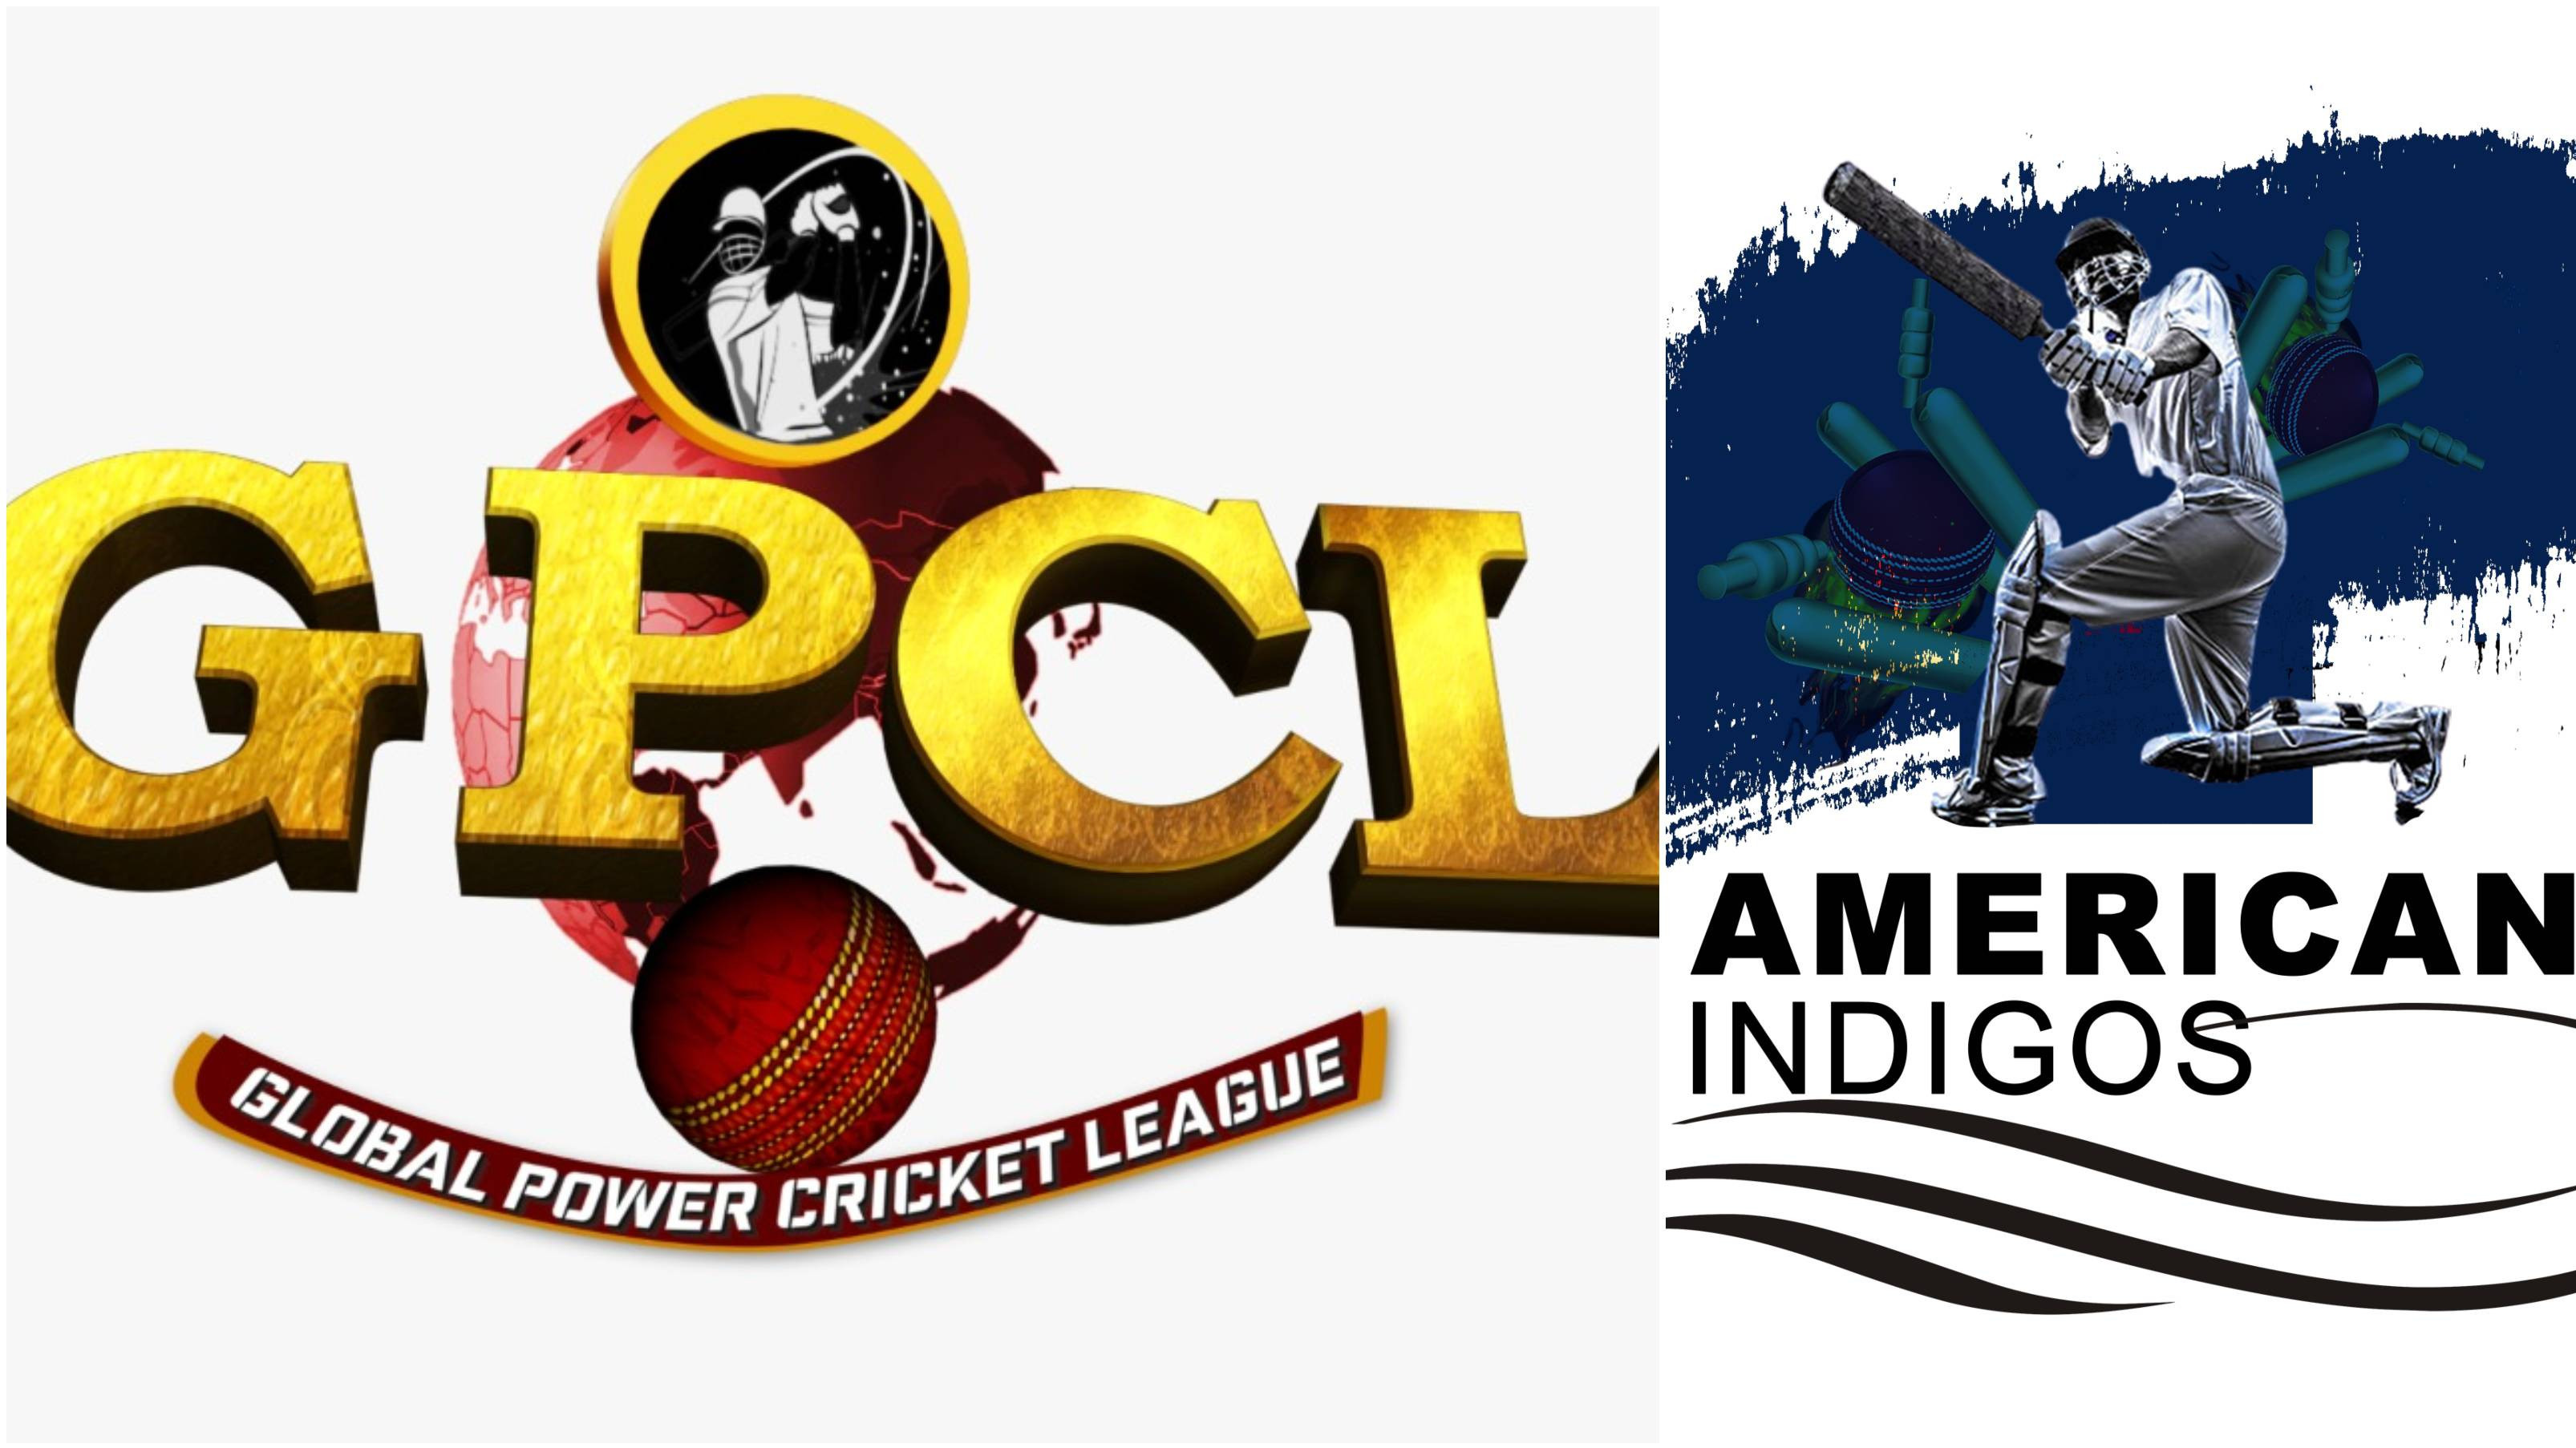 American Indigos squad unveiled for the inaugural GPCL season